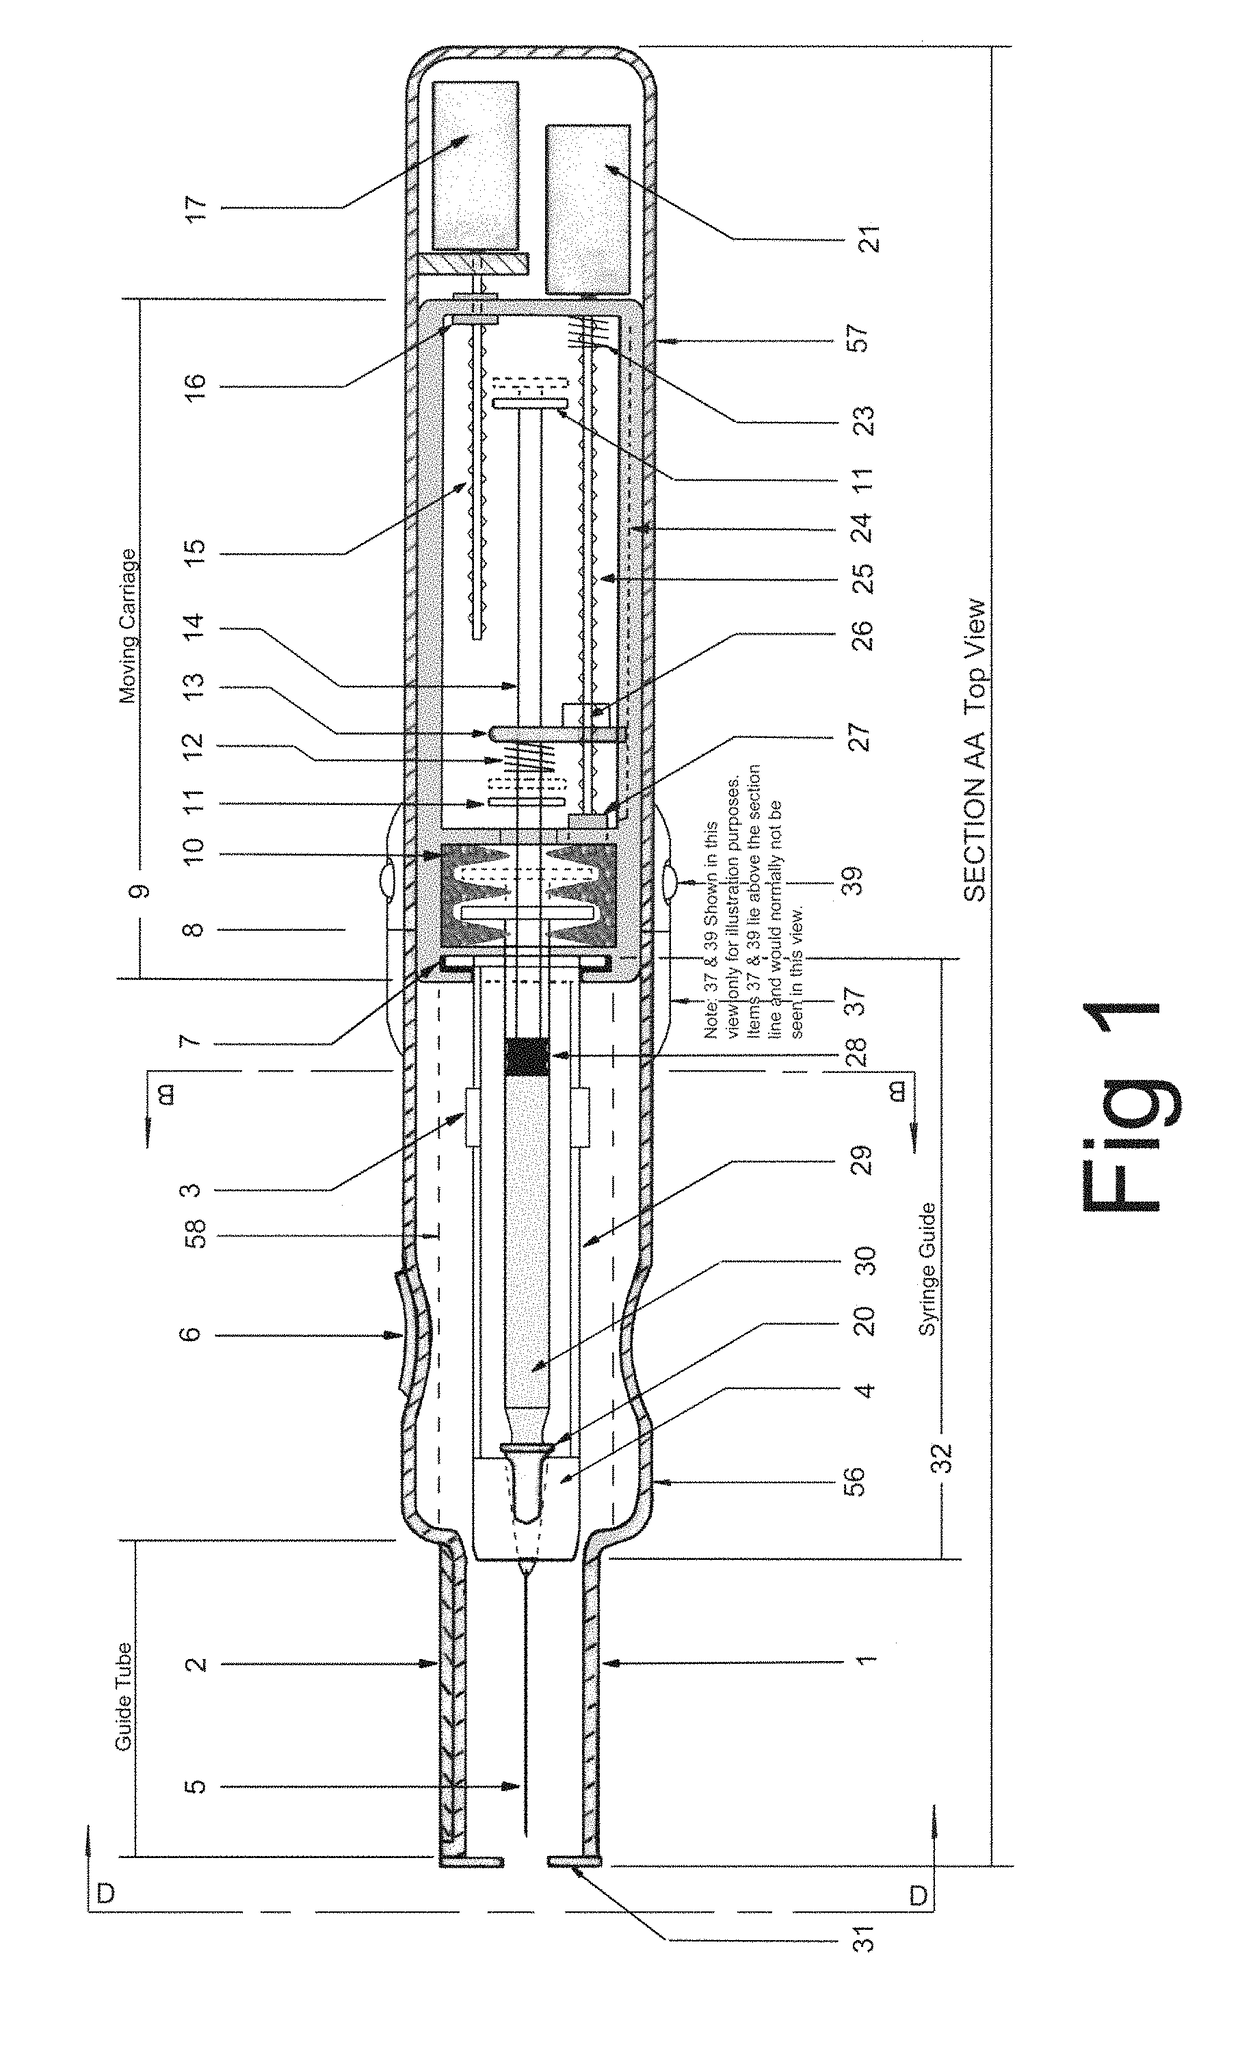 Electromechanical manipulating device for medical needle and syringe with sensory biofeedback and pain suppression capability